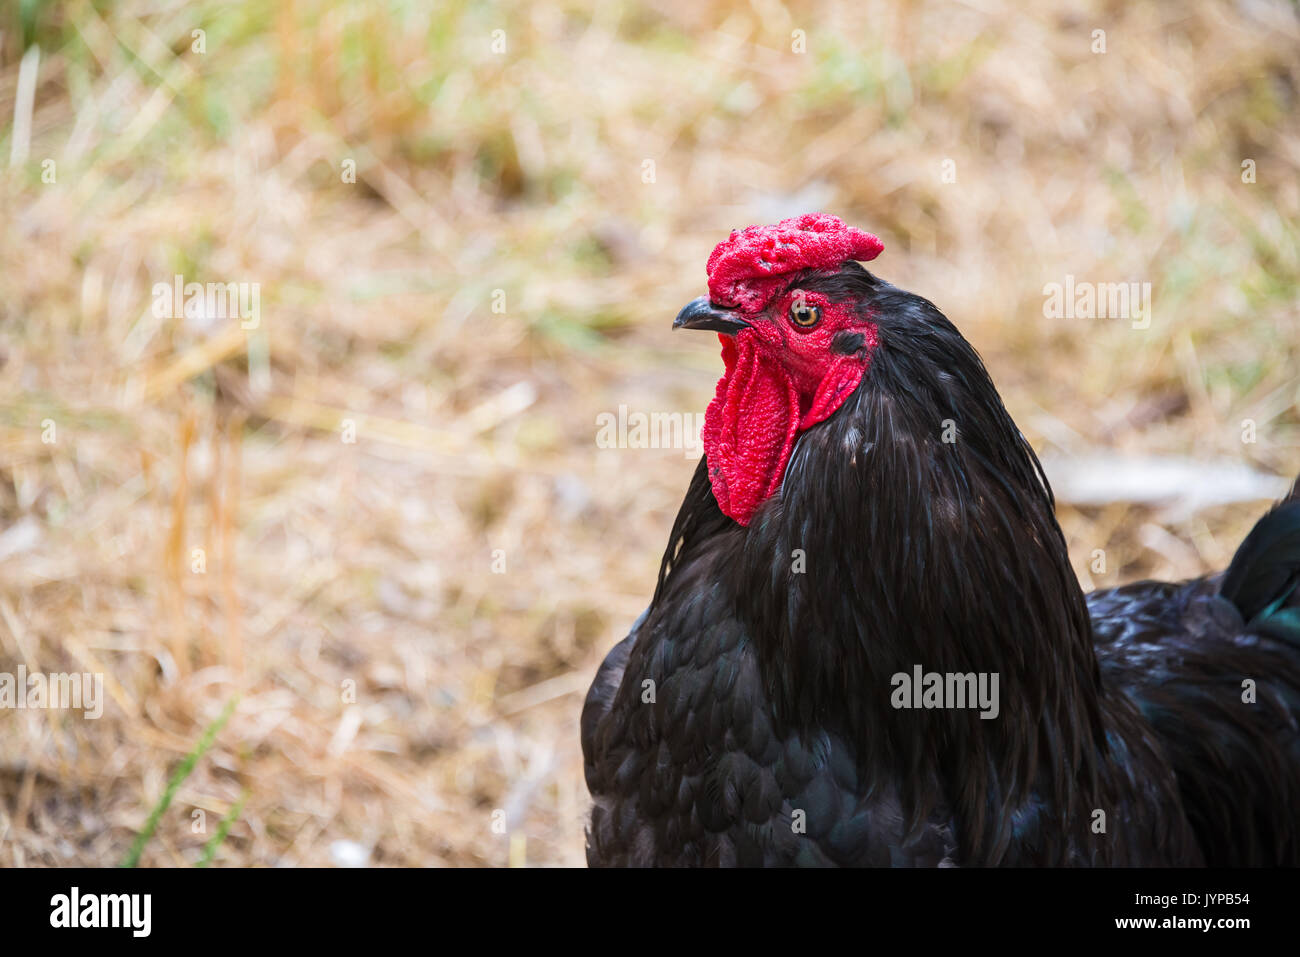 Profile of a Black Rooster in Barnyard Stock Photo